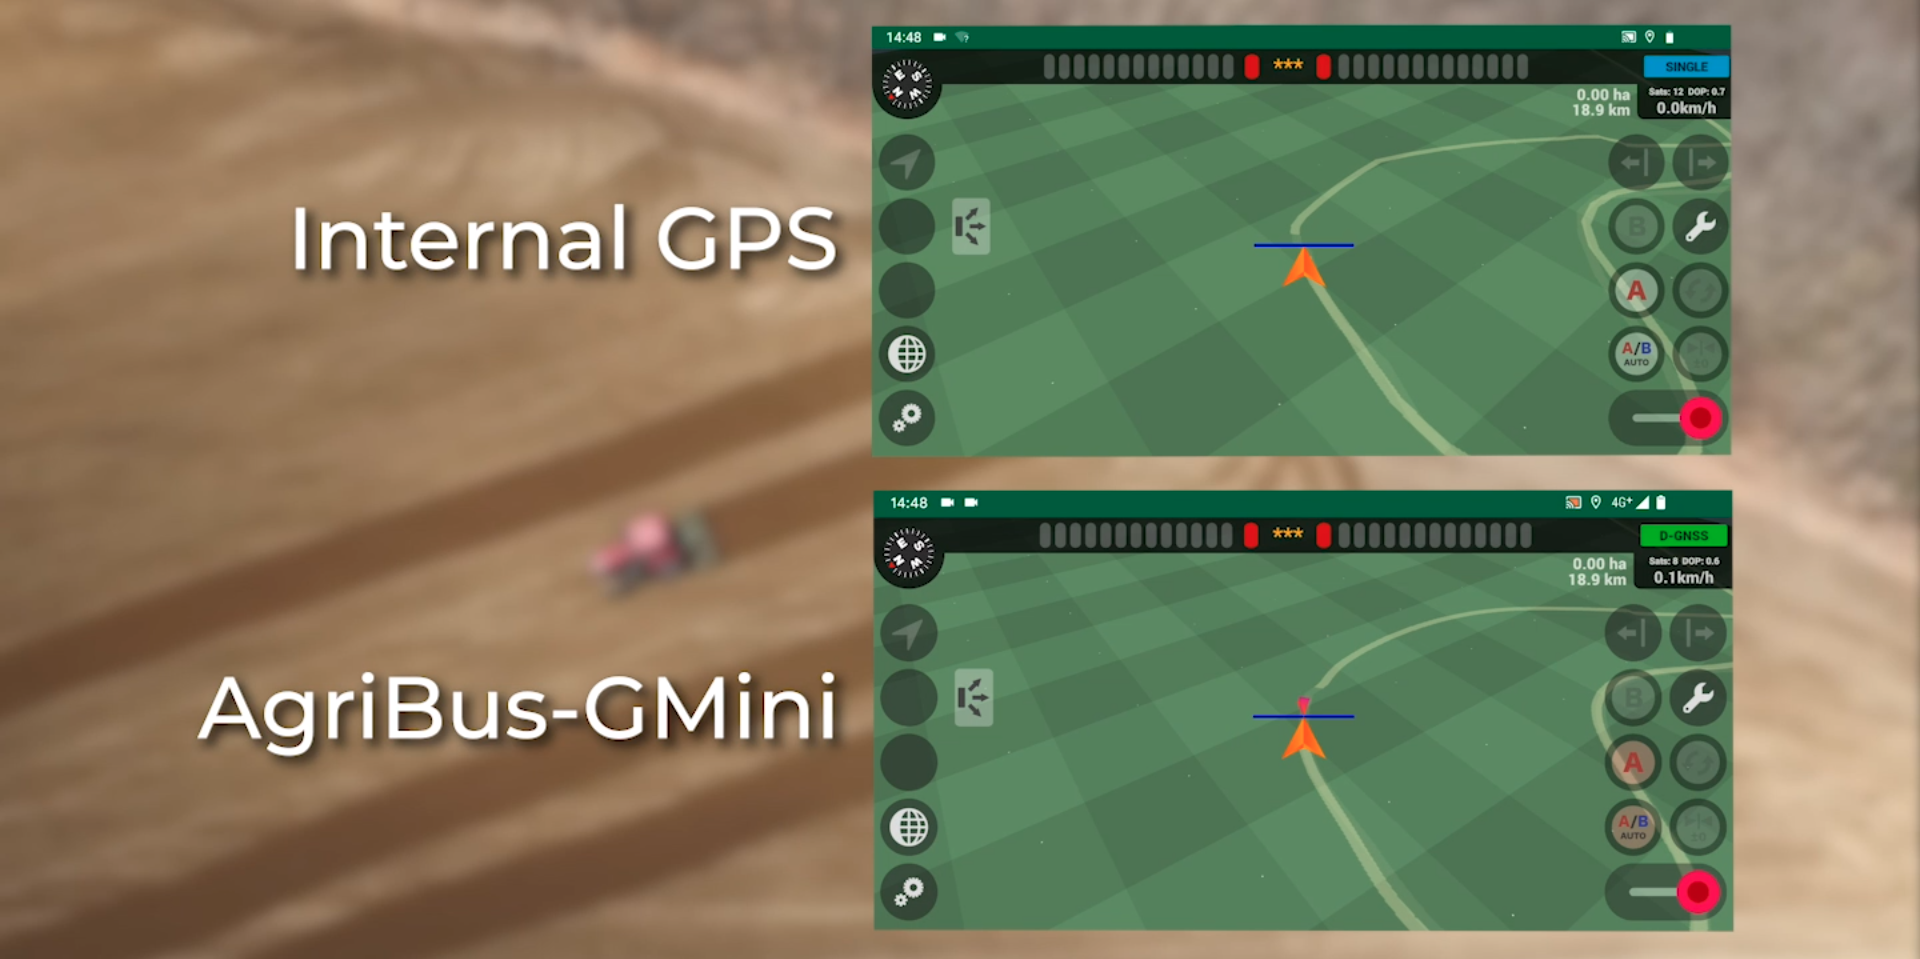 What is the difference between AgriBus-GMini and smartphone built-in GPS?